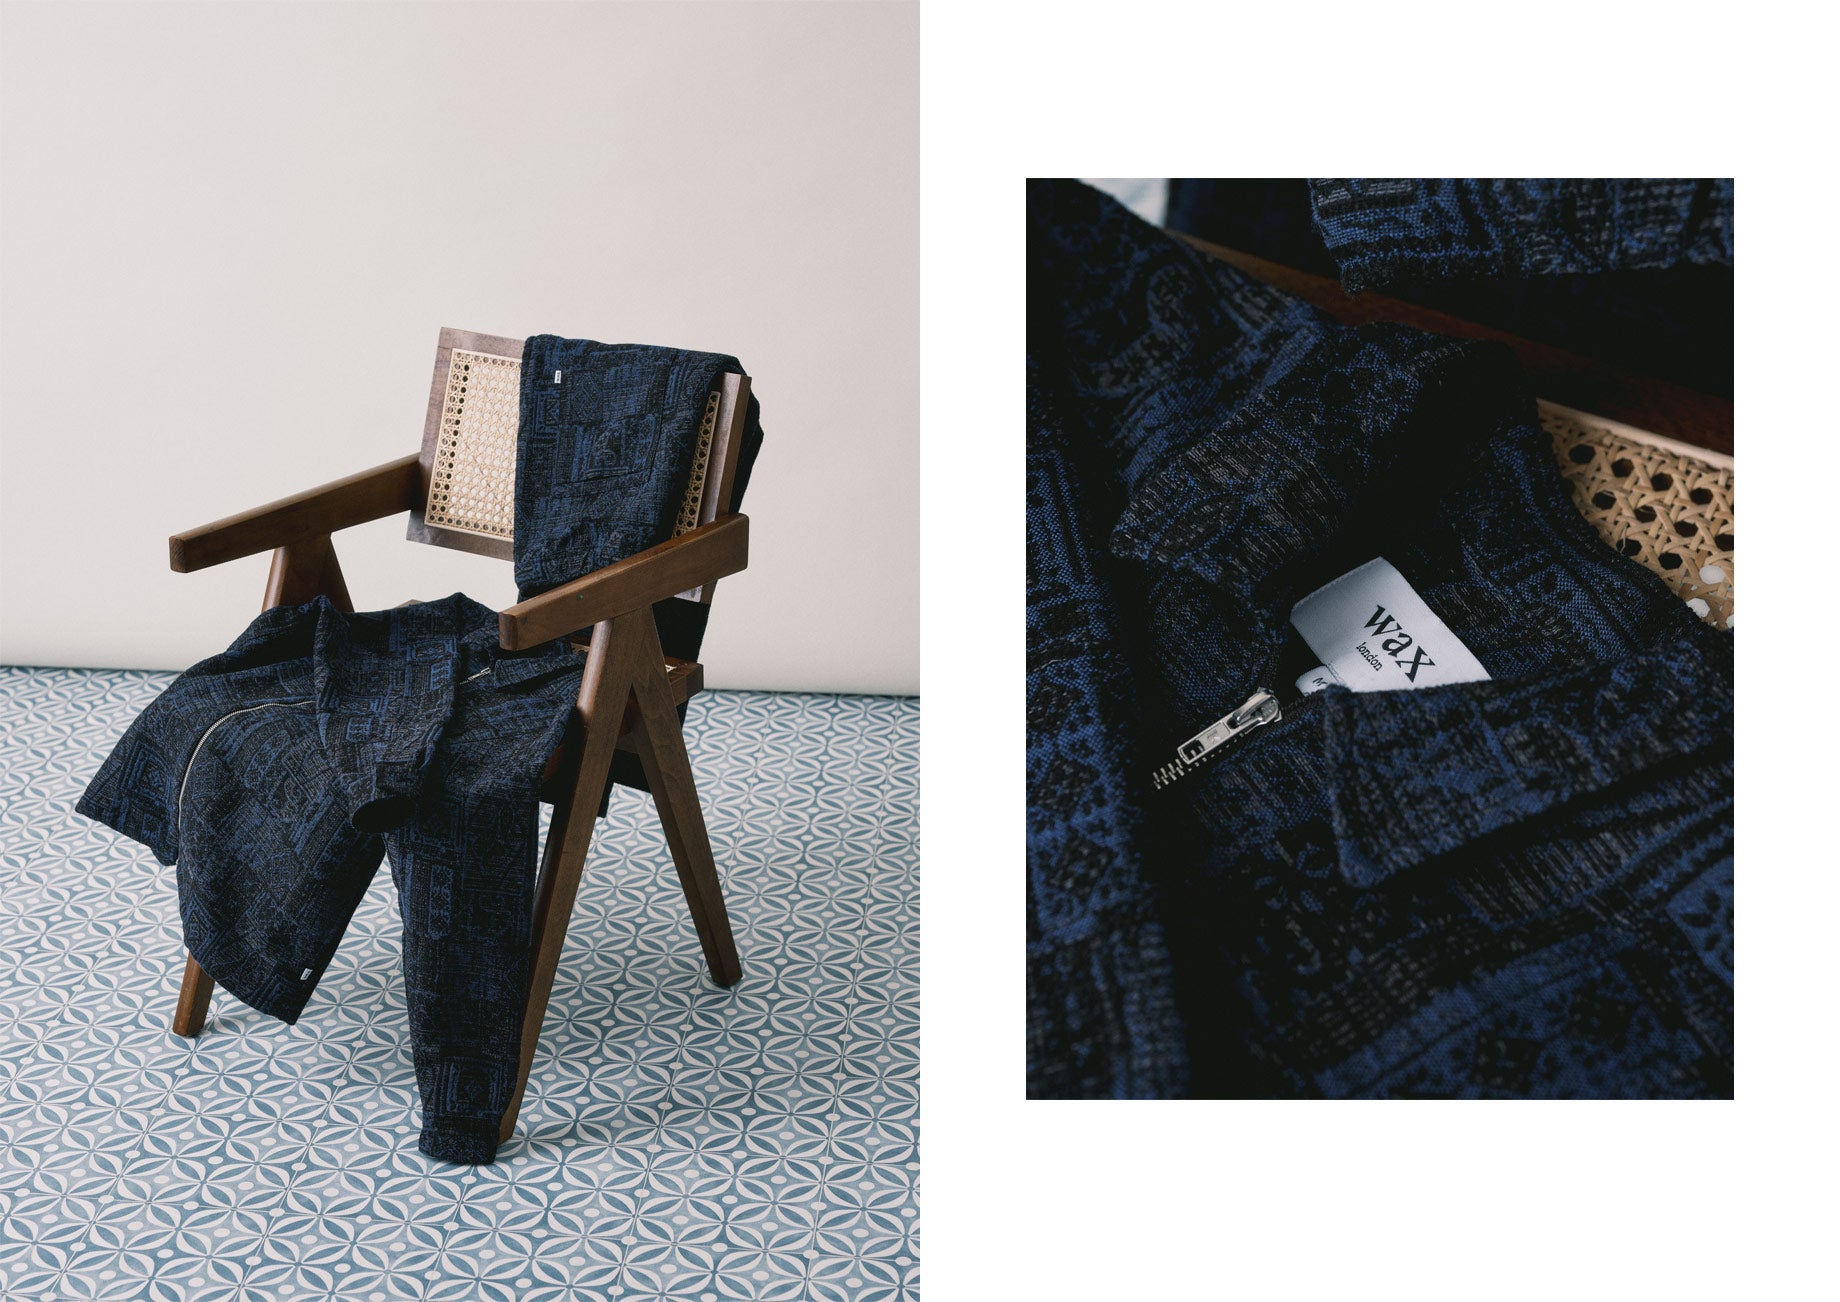 Wax London Jacquard Kurt Trousers and Chase Jacket folded on a chair